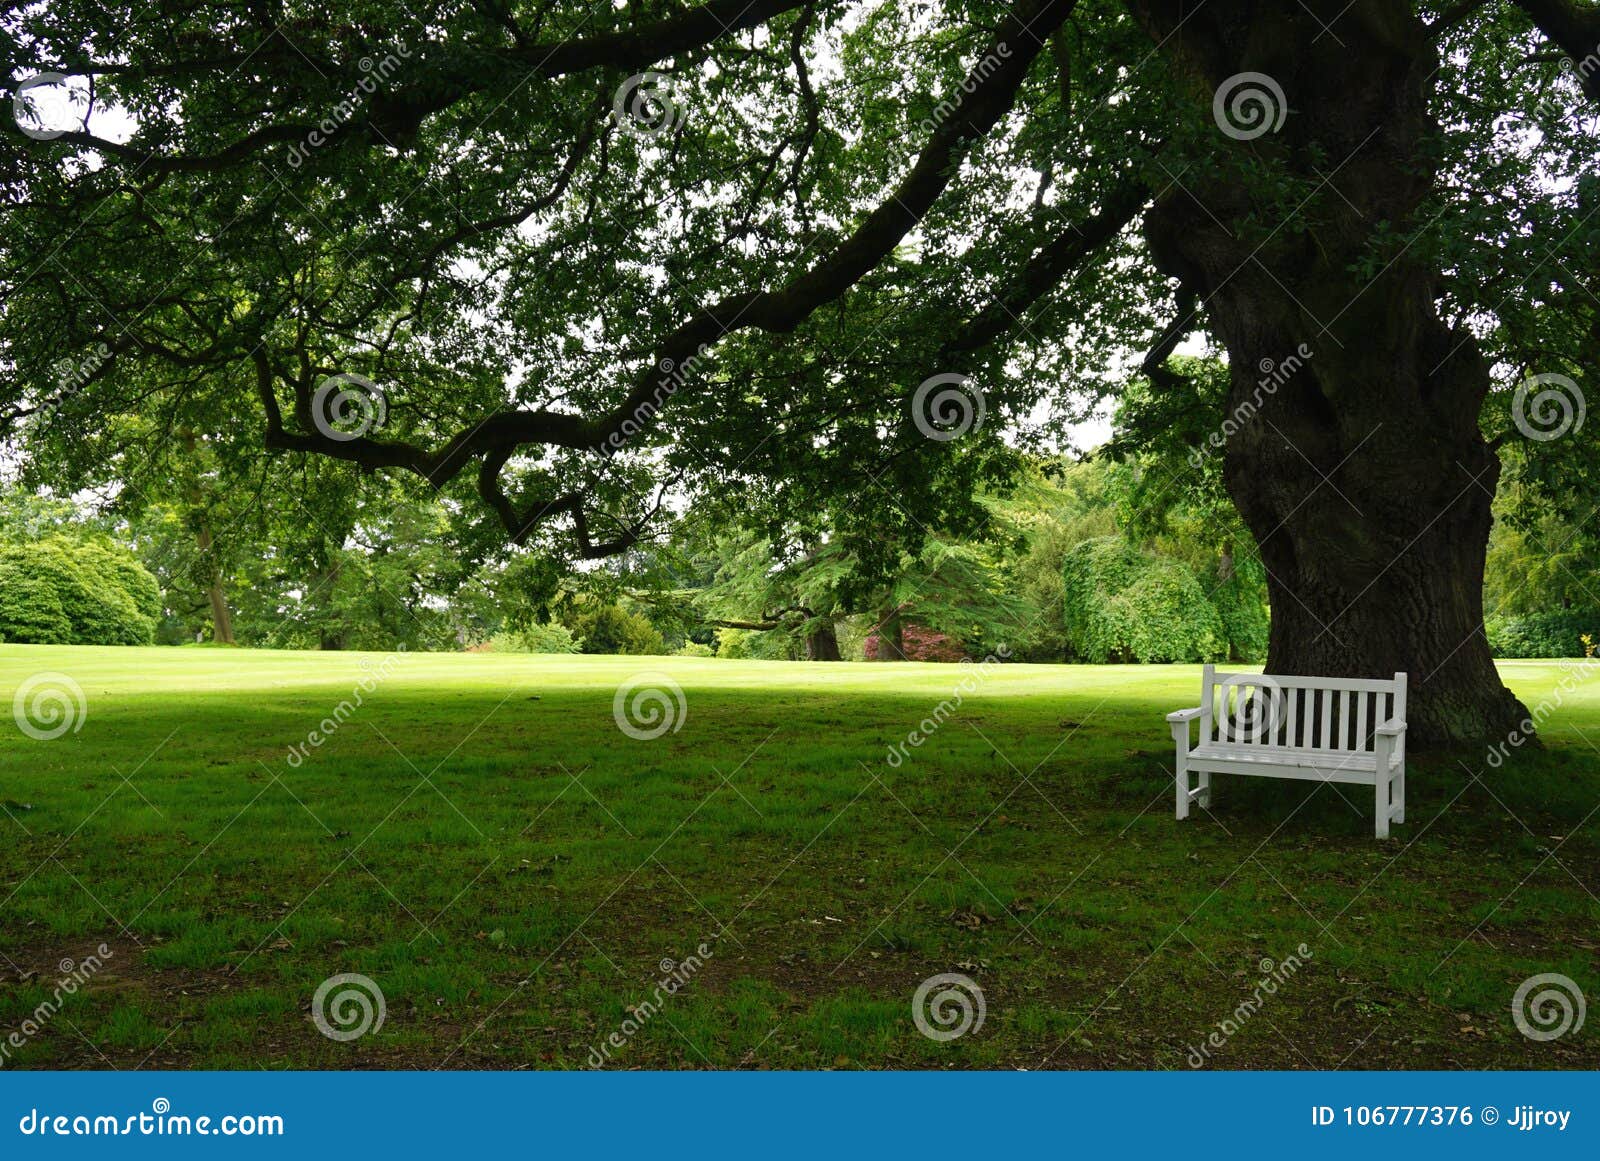 white park bench in the shade of a large tree